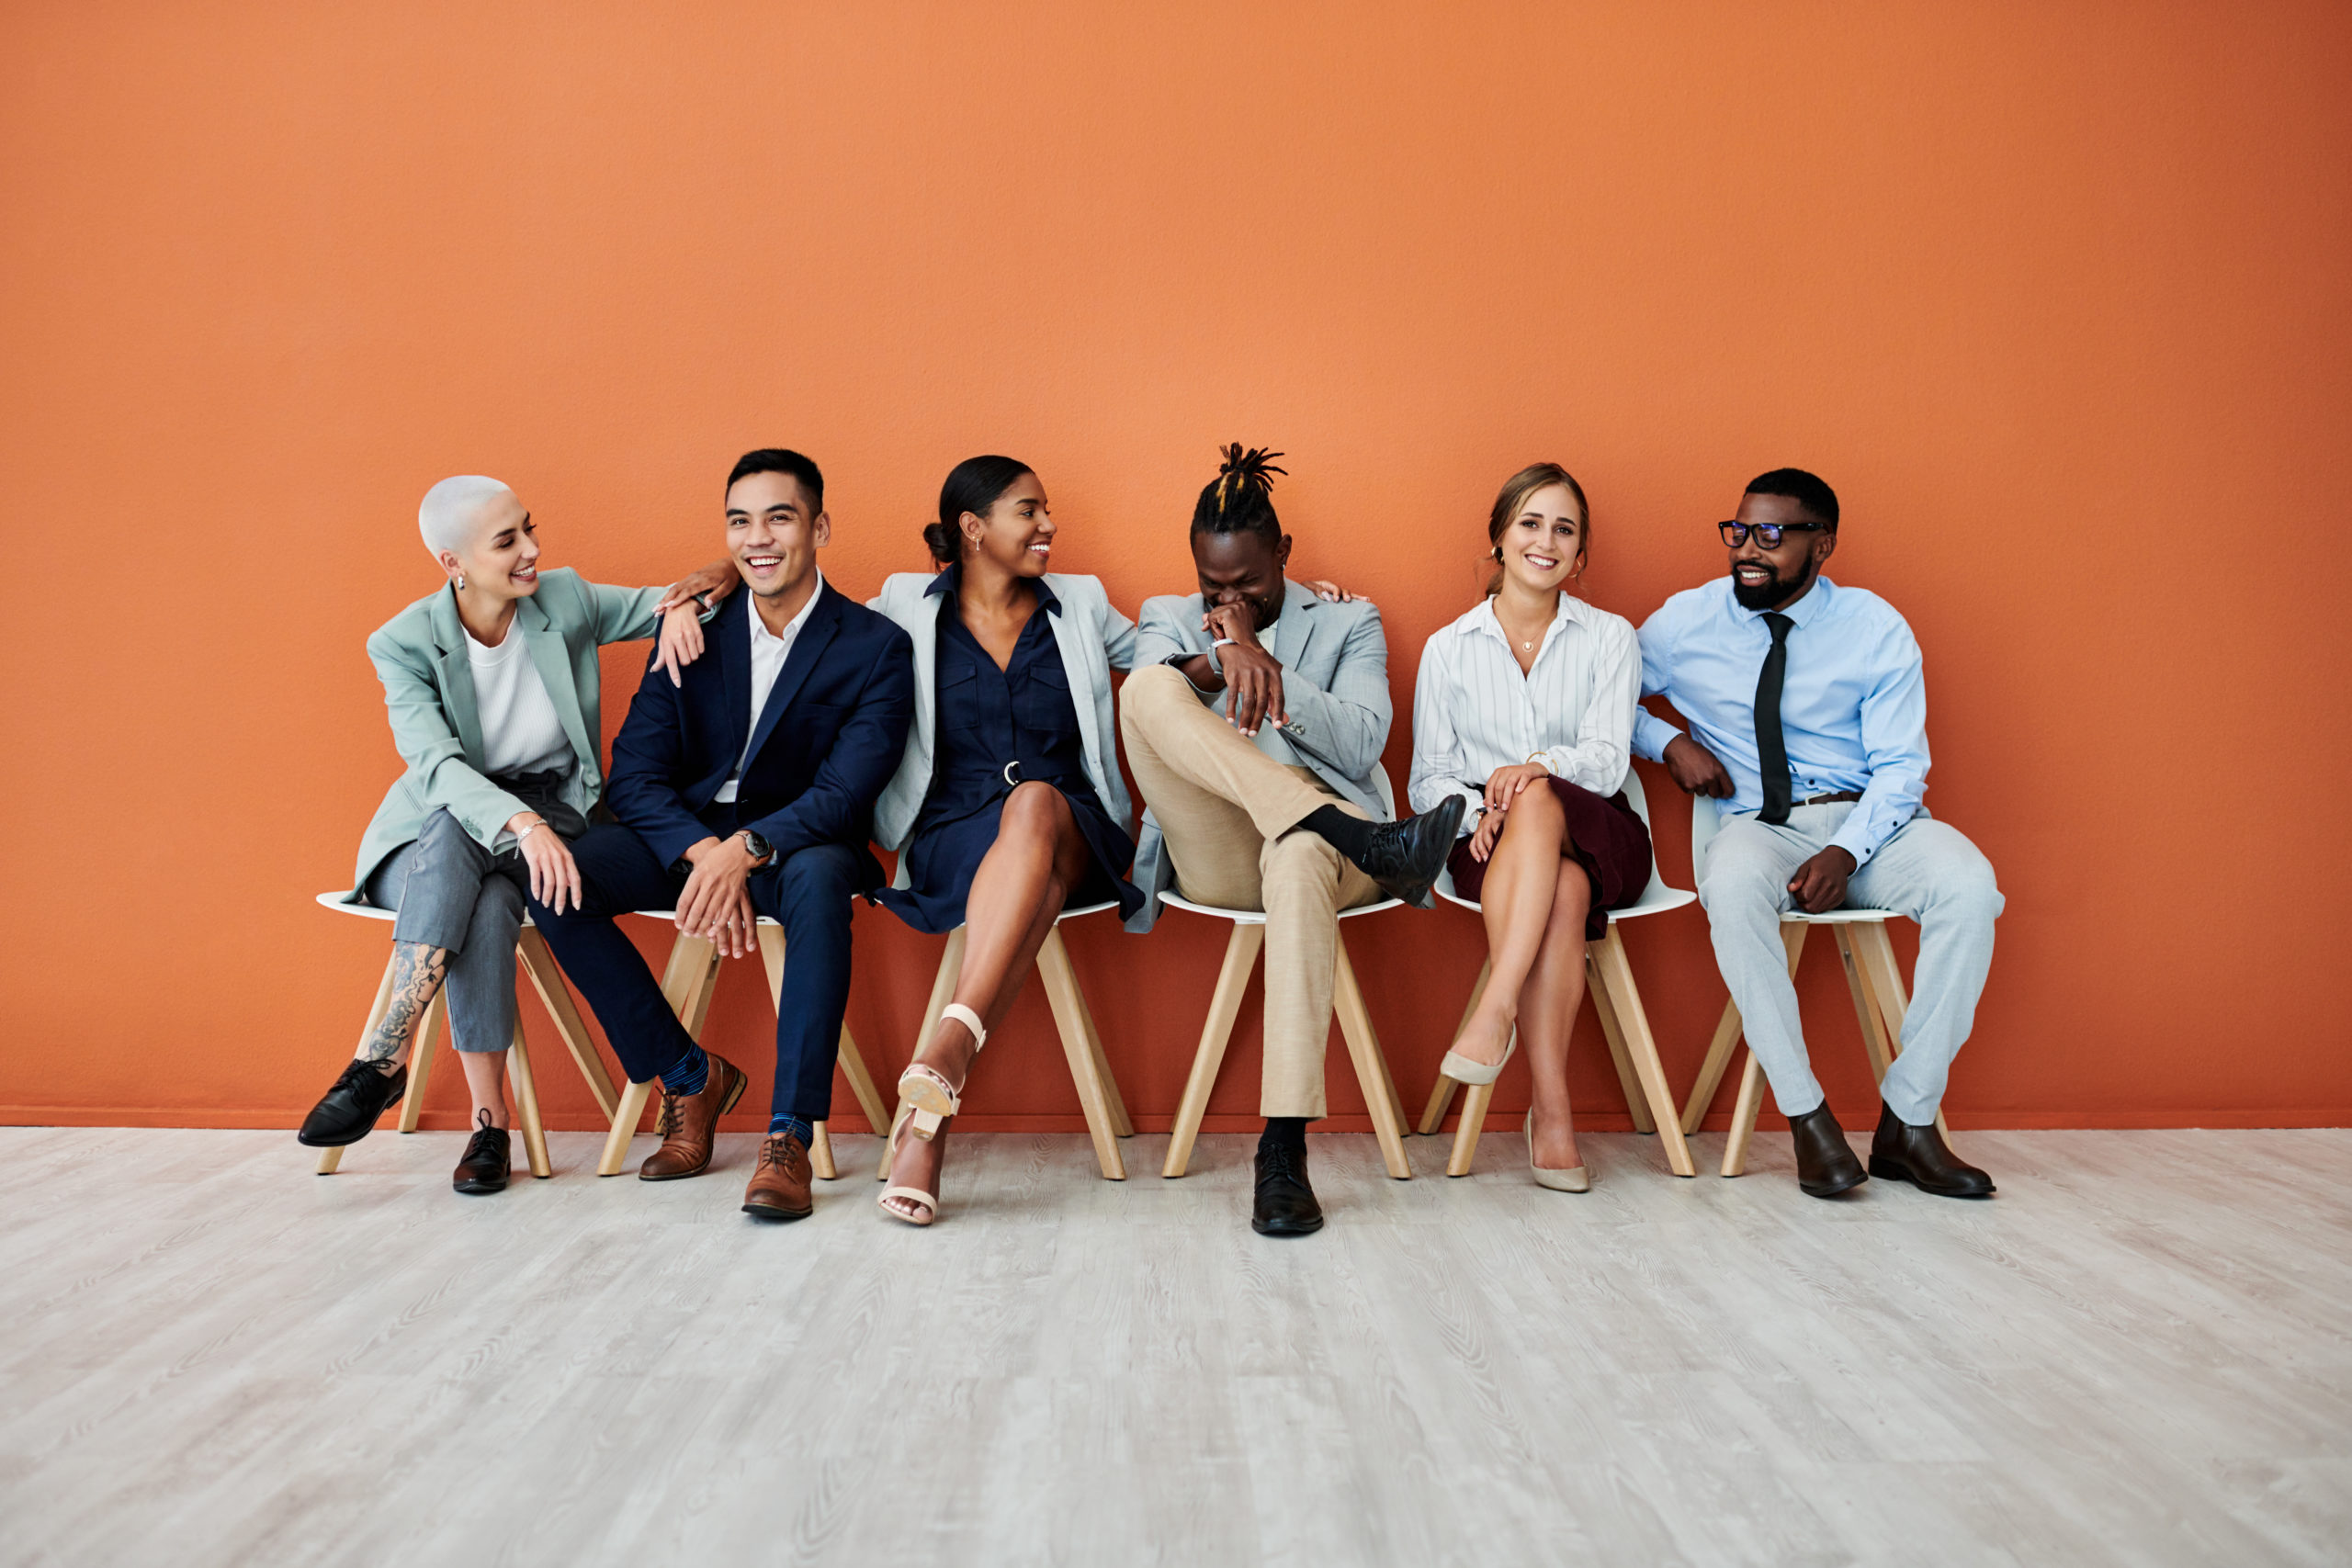 Shot of a group of businesspeople sitting against an orange background